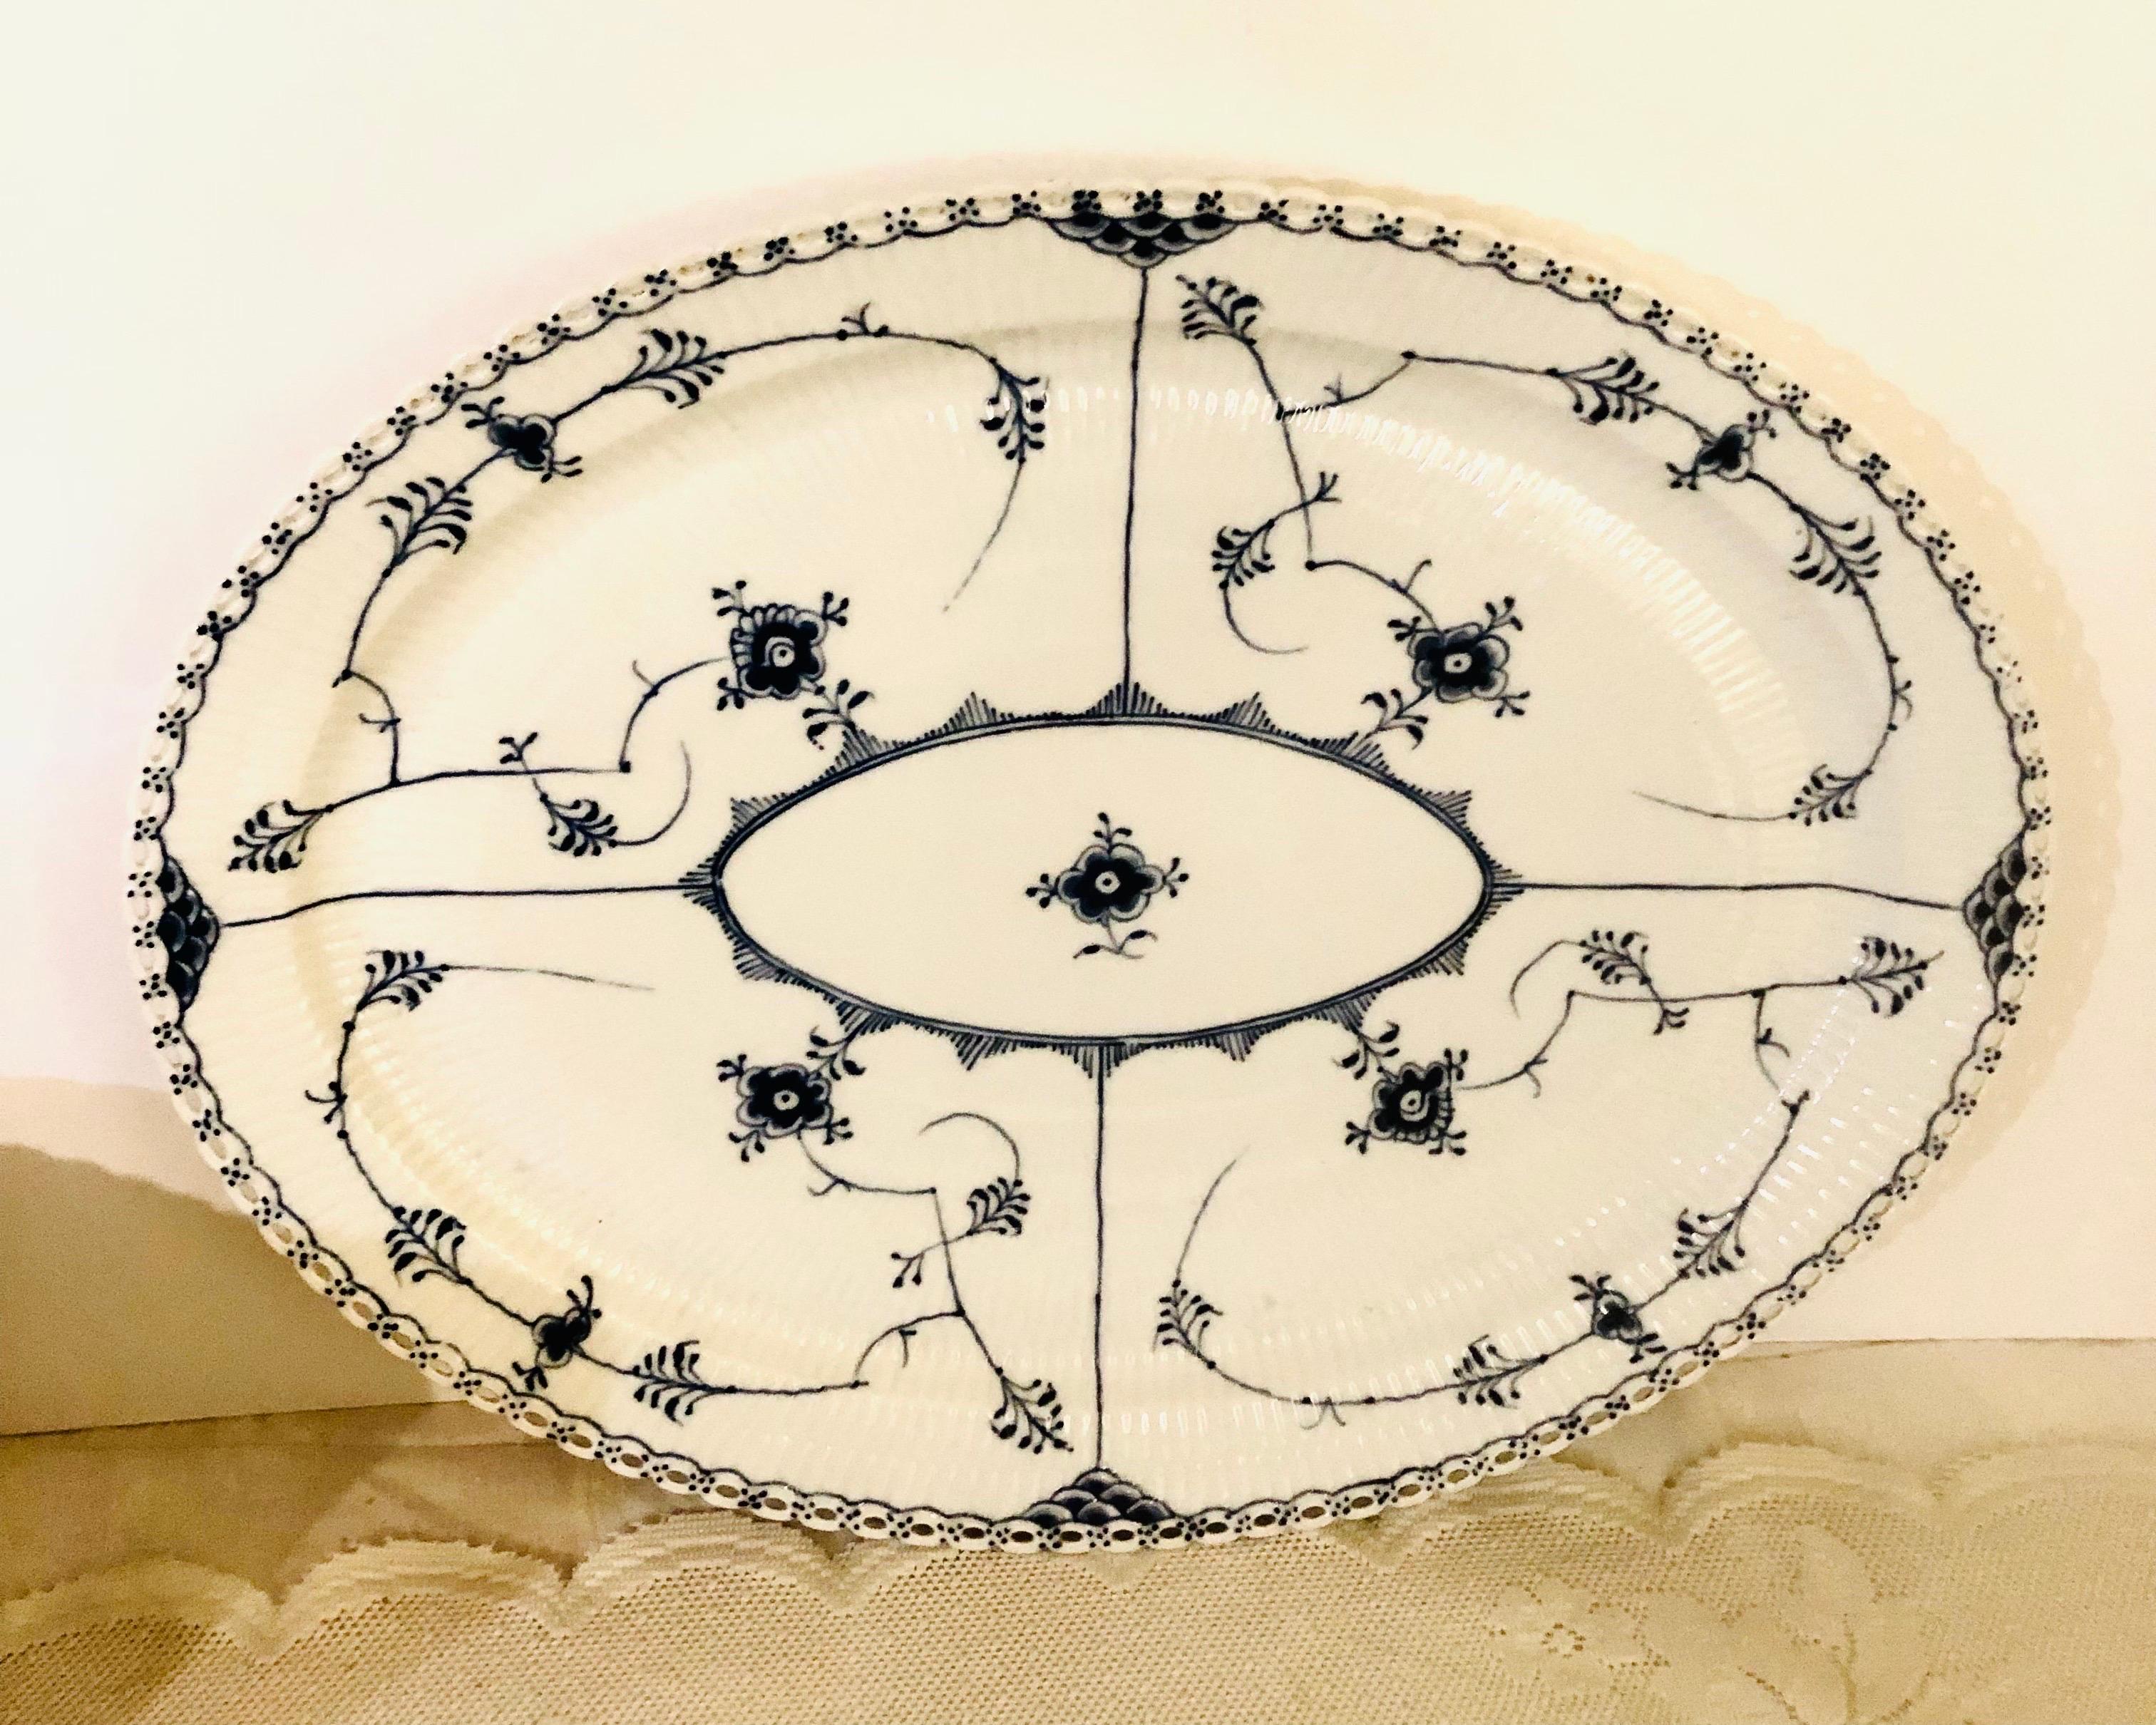 I want to offer you this fabulous oversized Royal Copenhagen platter with full lace openwork design on the borders. This full lace fluted dinnerware was the first dinner service sold by Royal Copenhagen in 1775. In 1885, the artistic director of